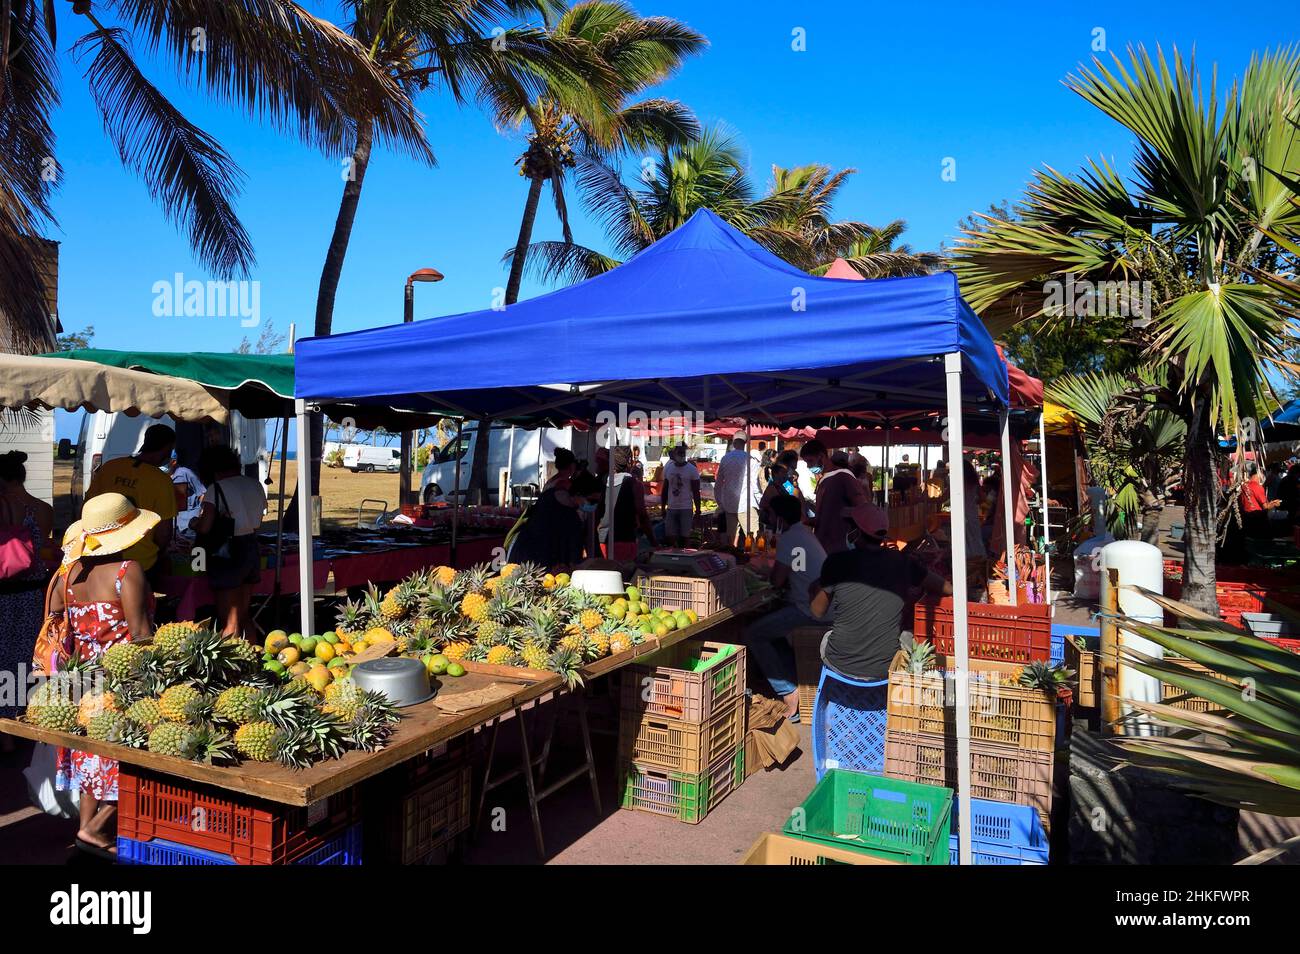 France, Reunion island (French overseas department), Saint-Pierre, the Saturday market, the pineapple fruit stalls Stock Photo